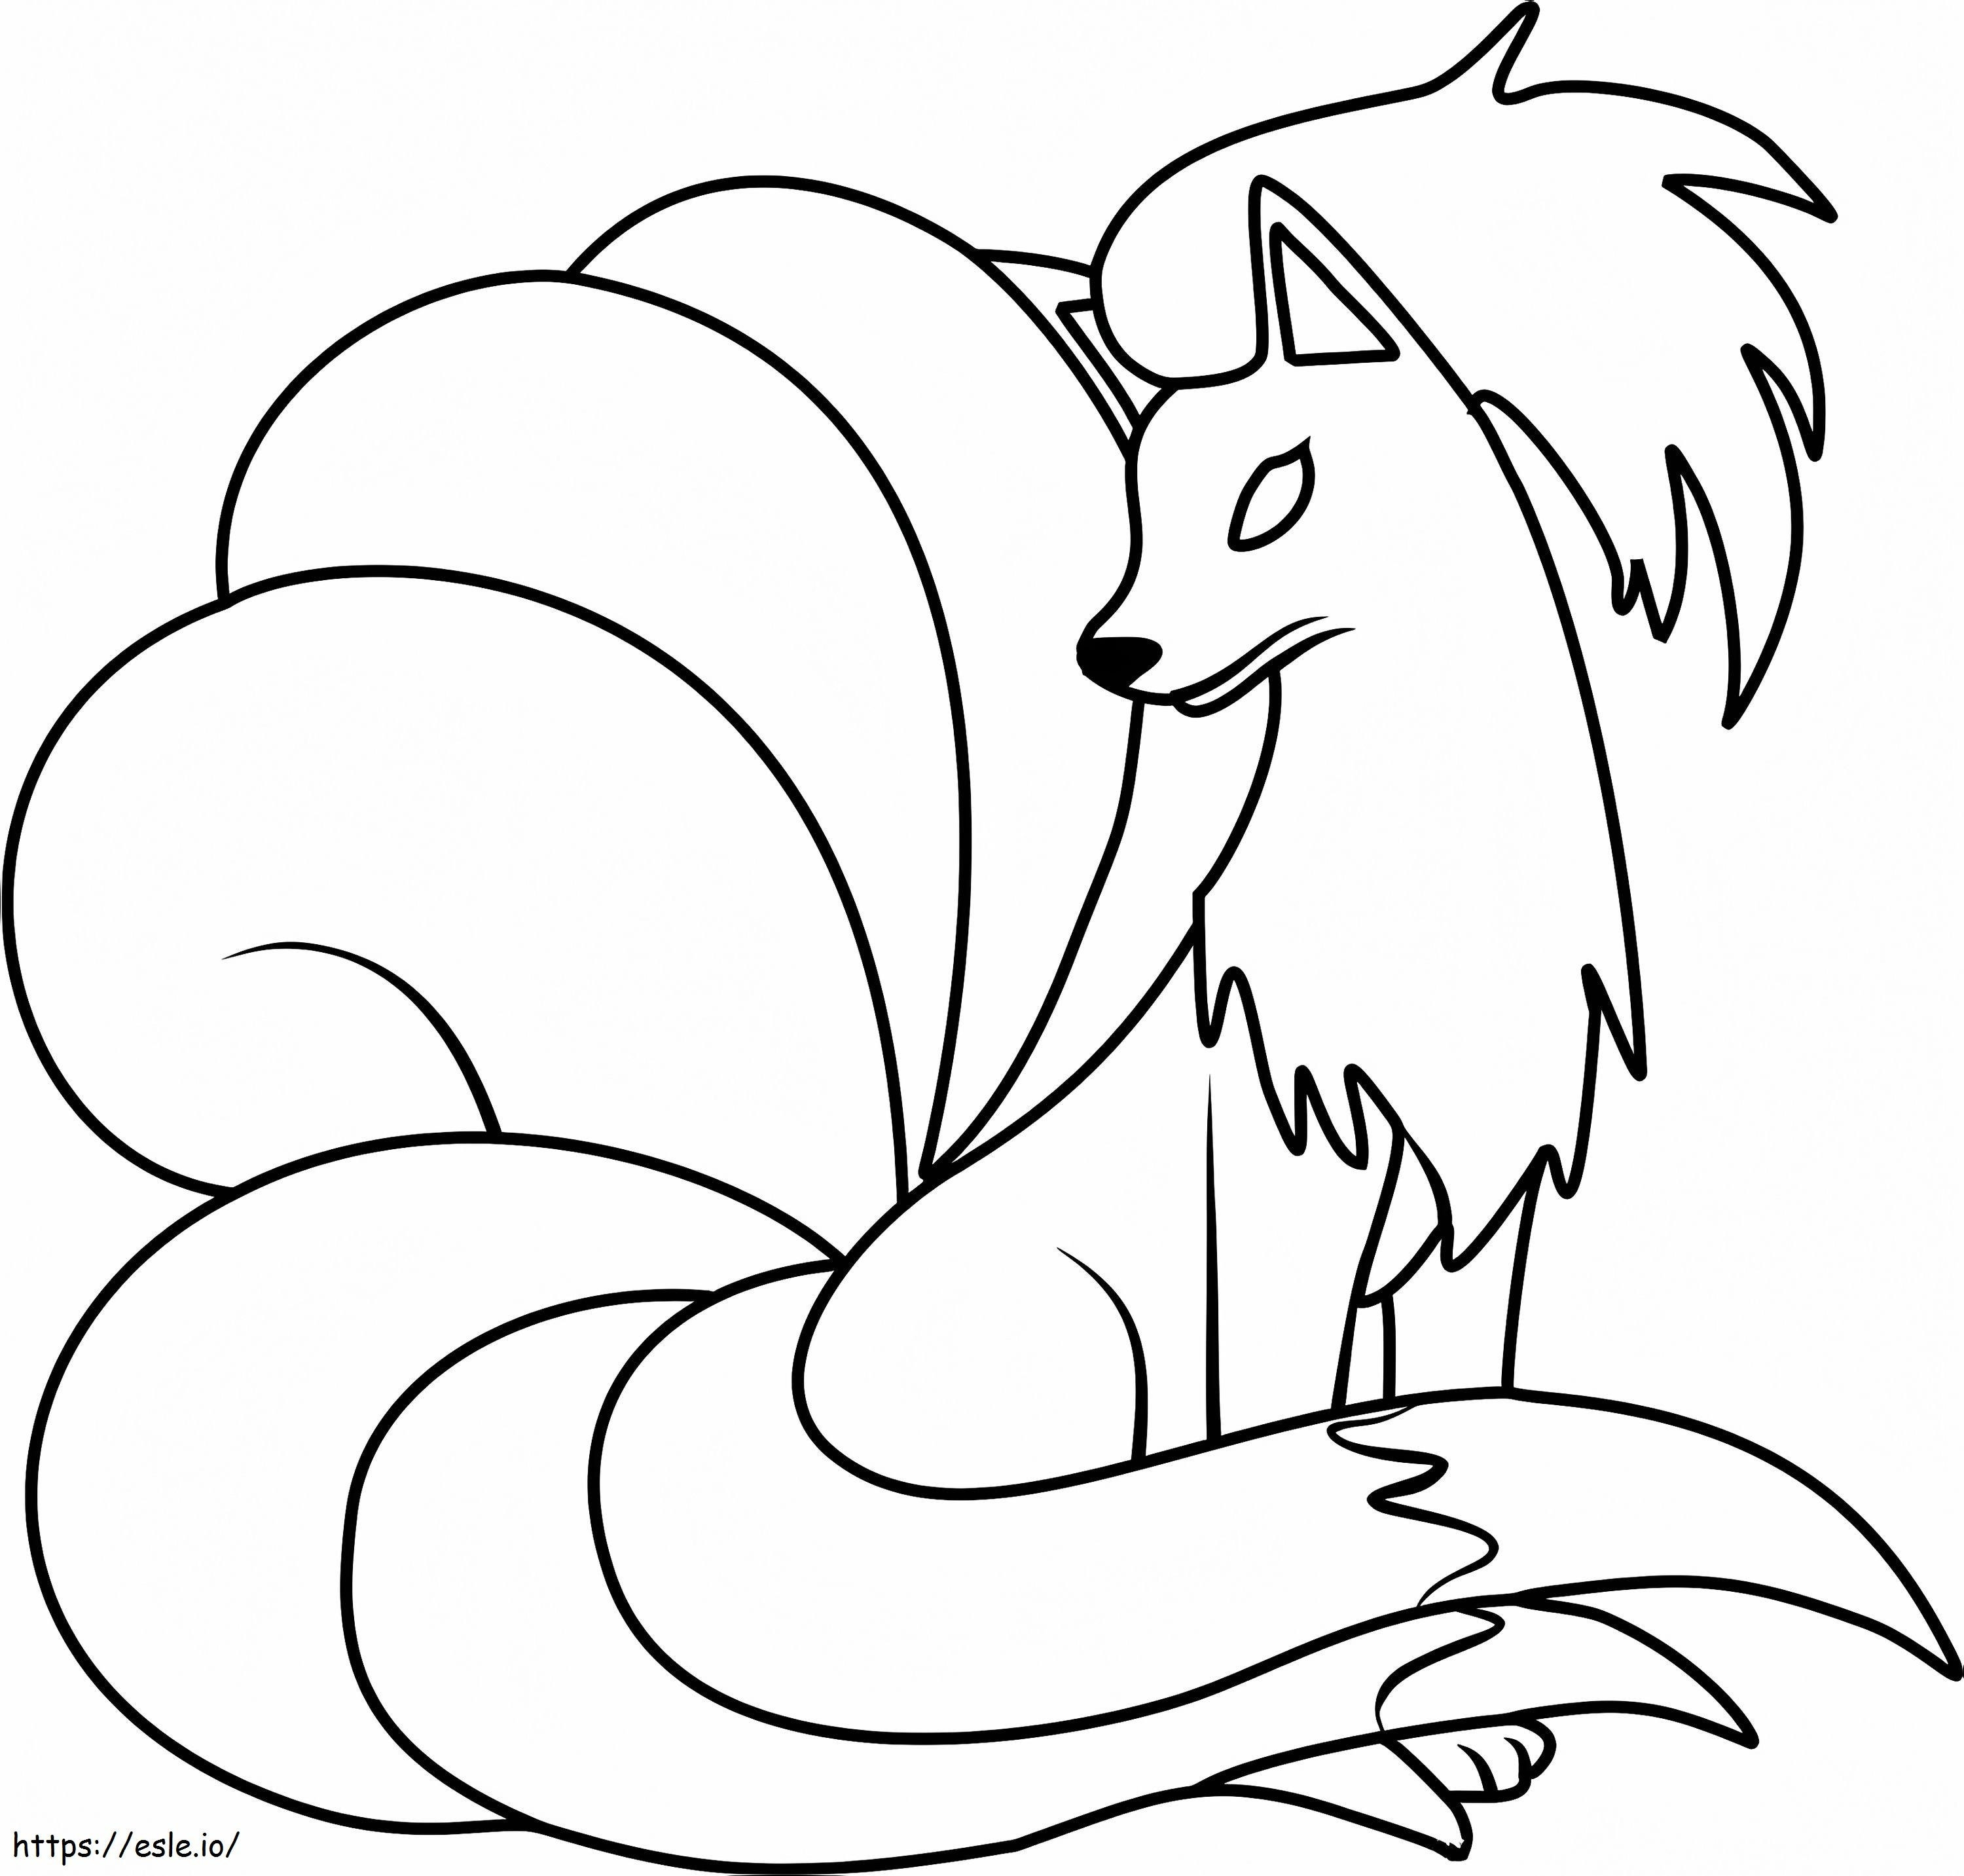 1529719742 34 coloring page